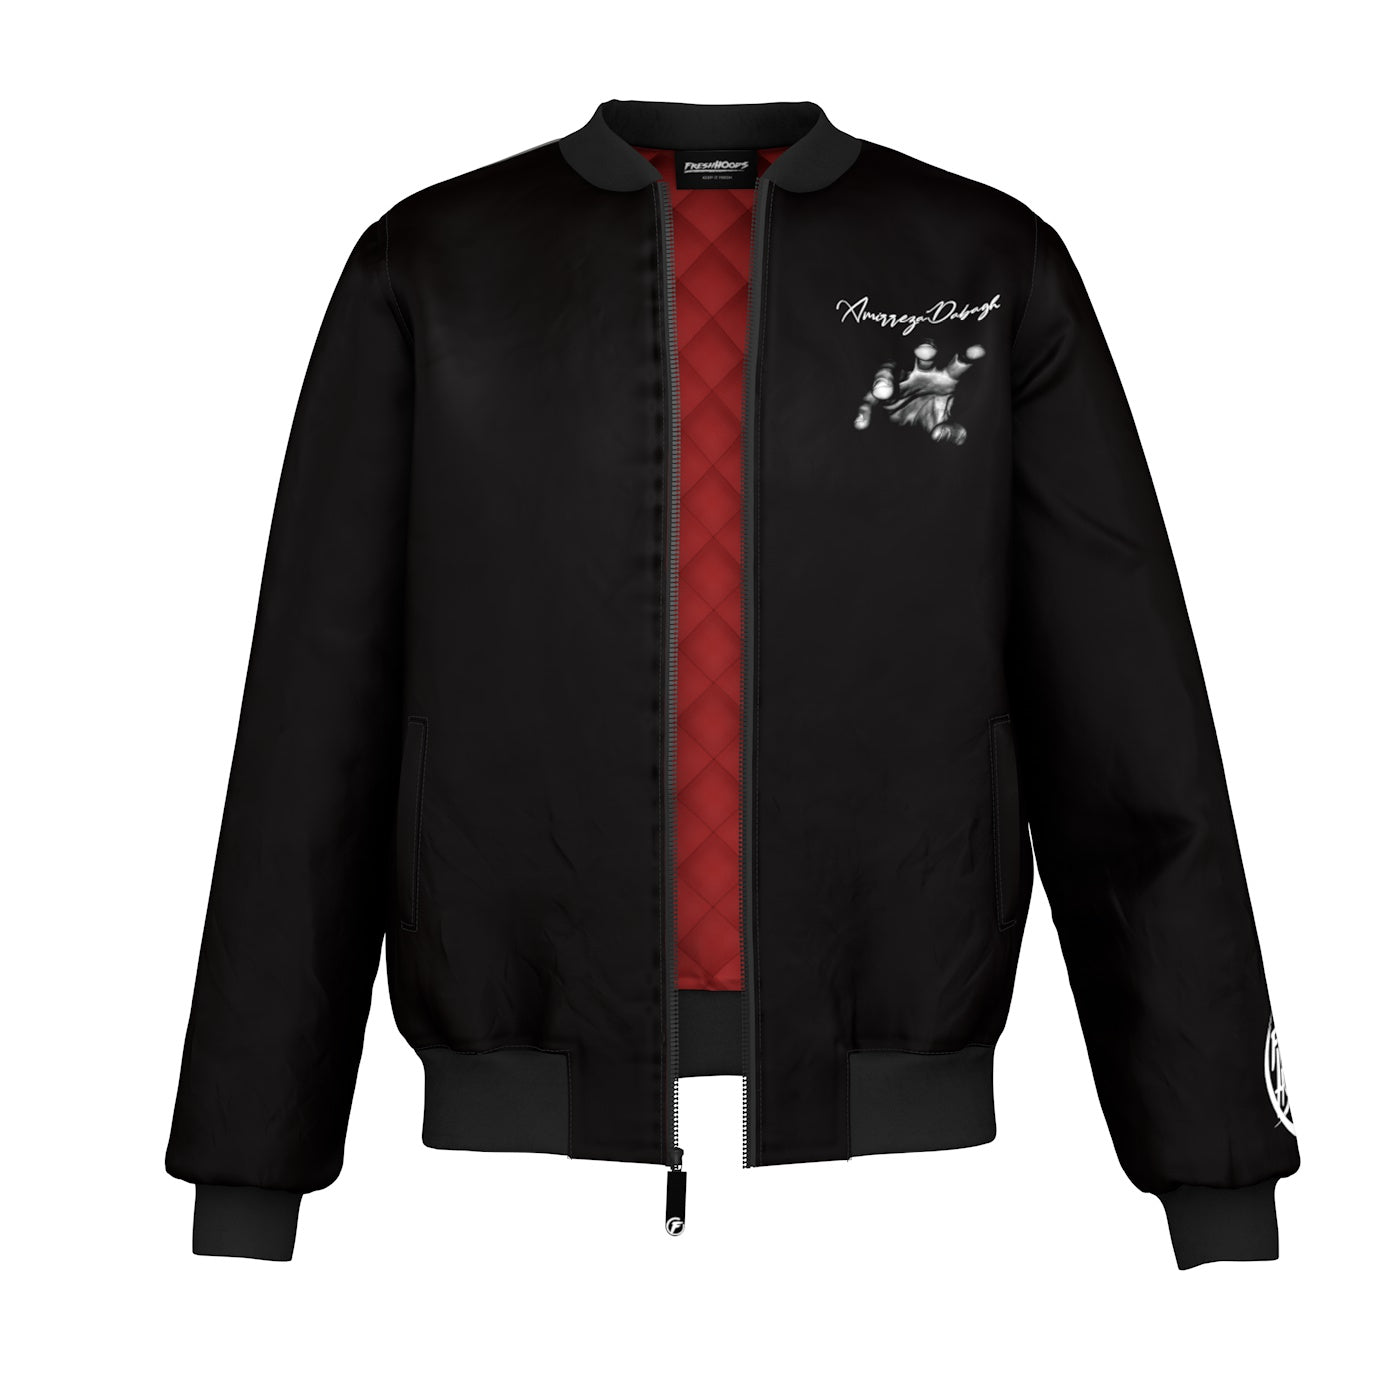 The Other Side Bomber Jacket